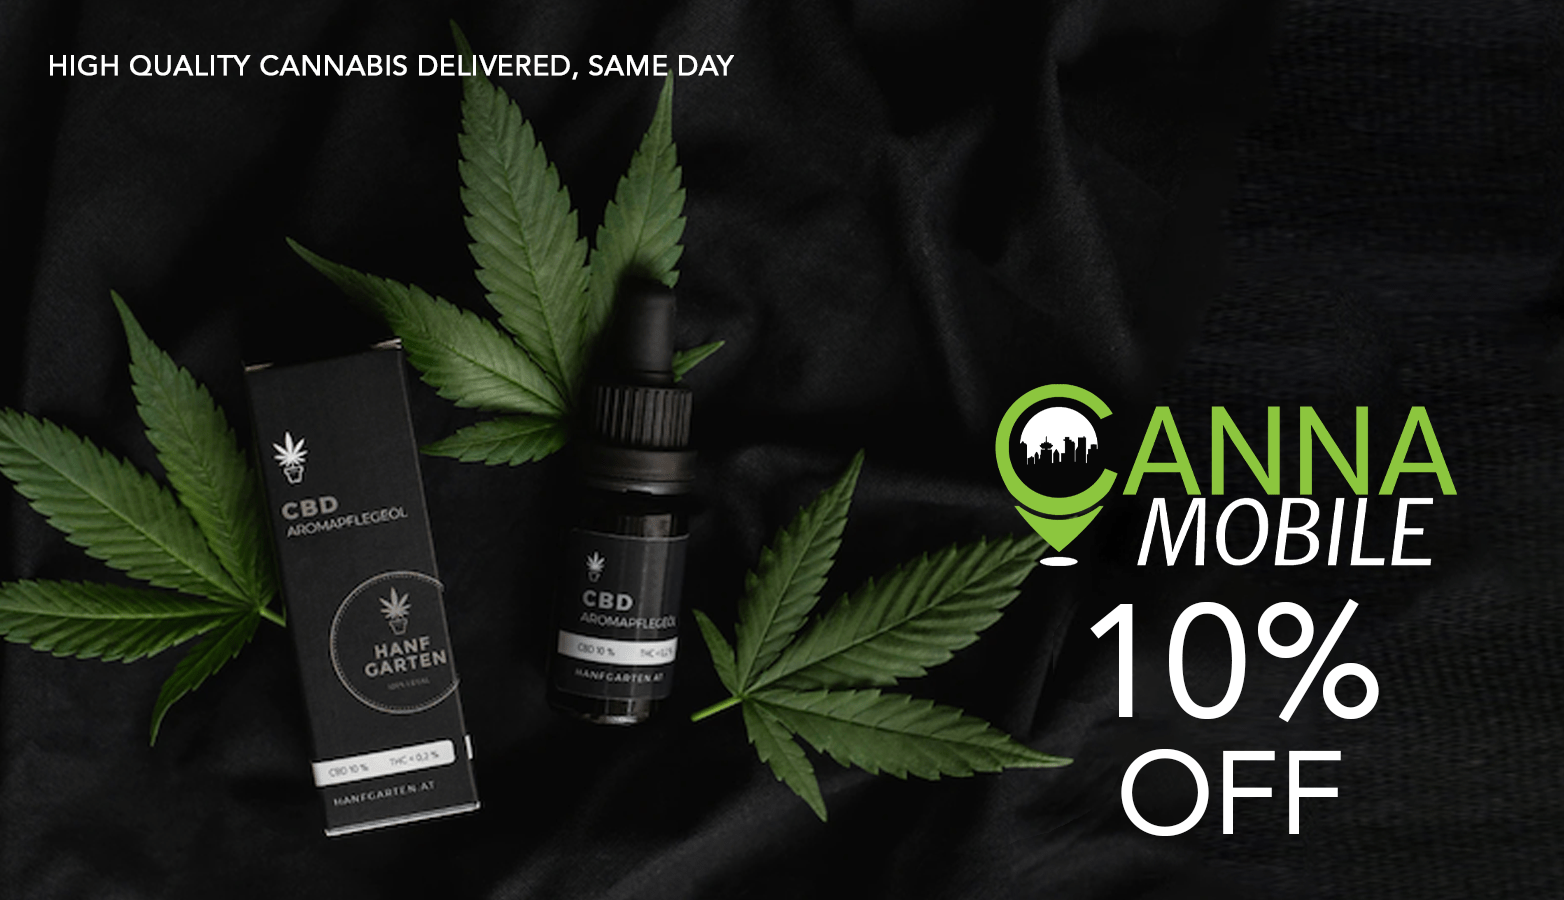 CannaMobile CBD Coupon Code Offer Website